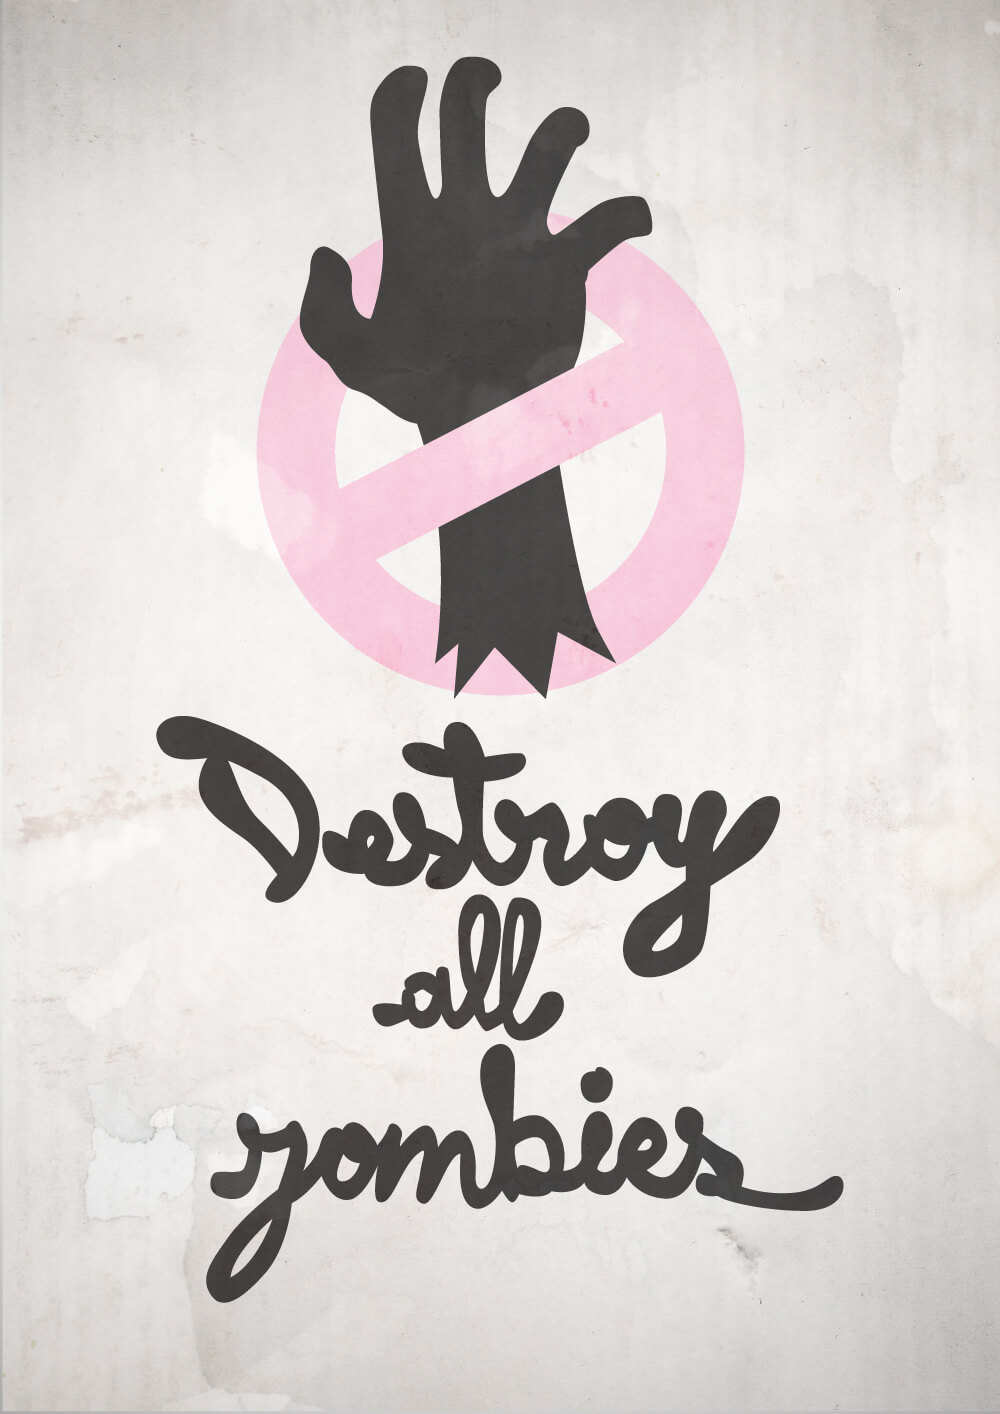 Logo destroy all zombies